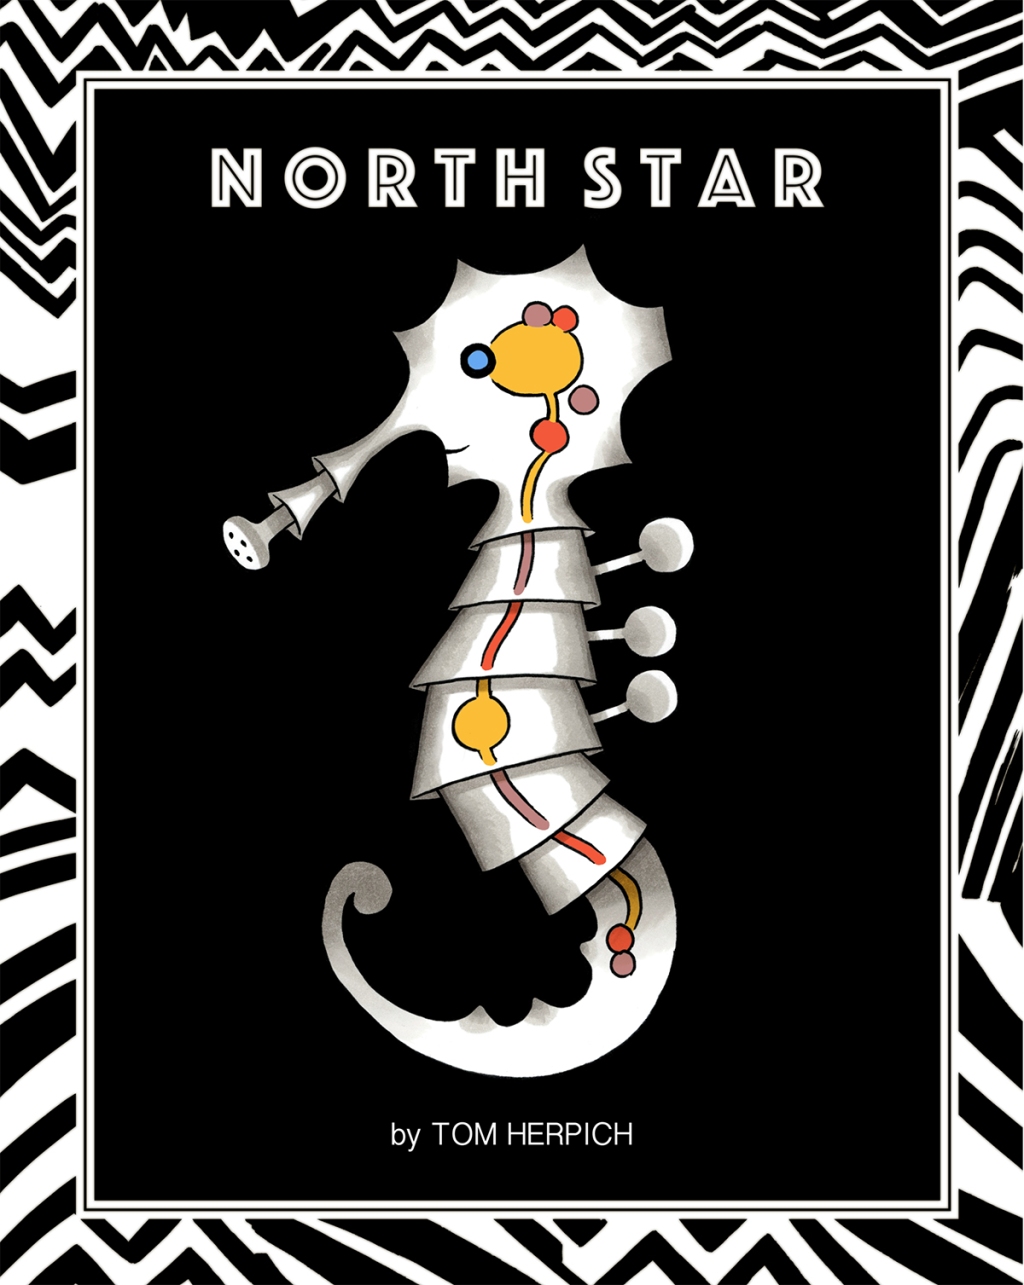 North Star in April from AdHouse Books